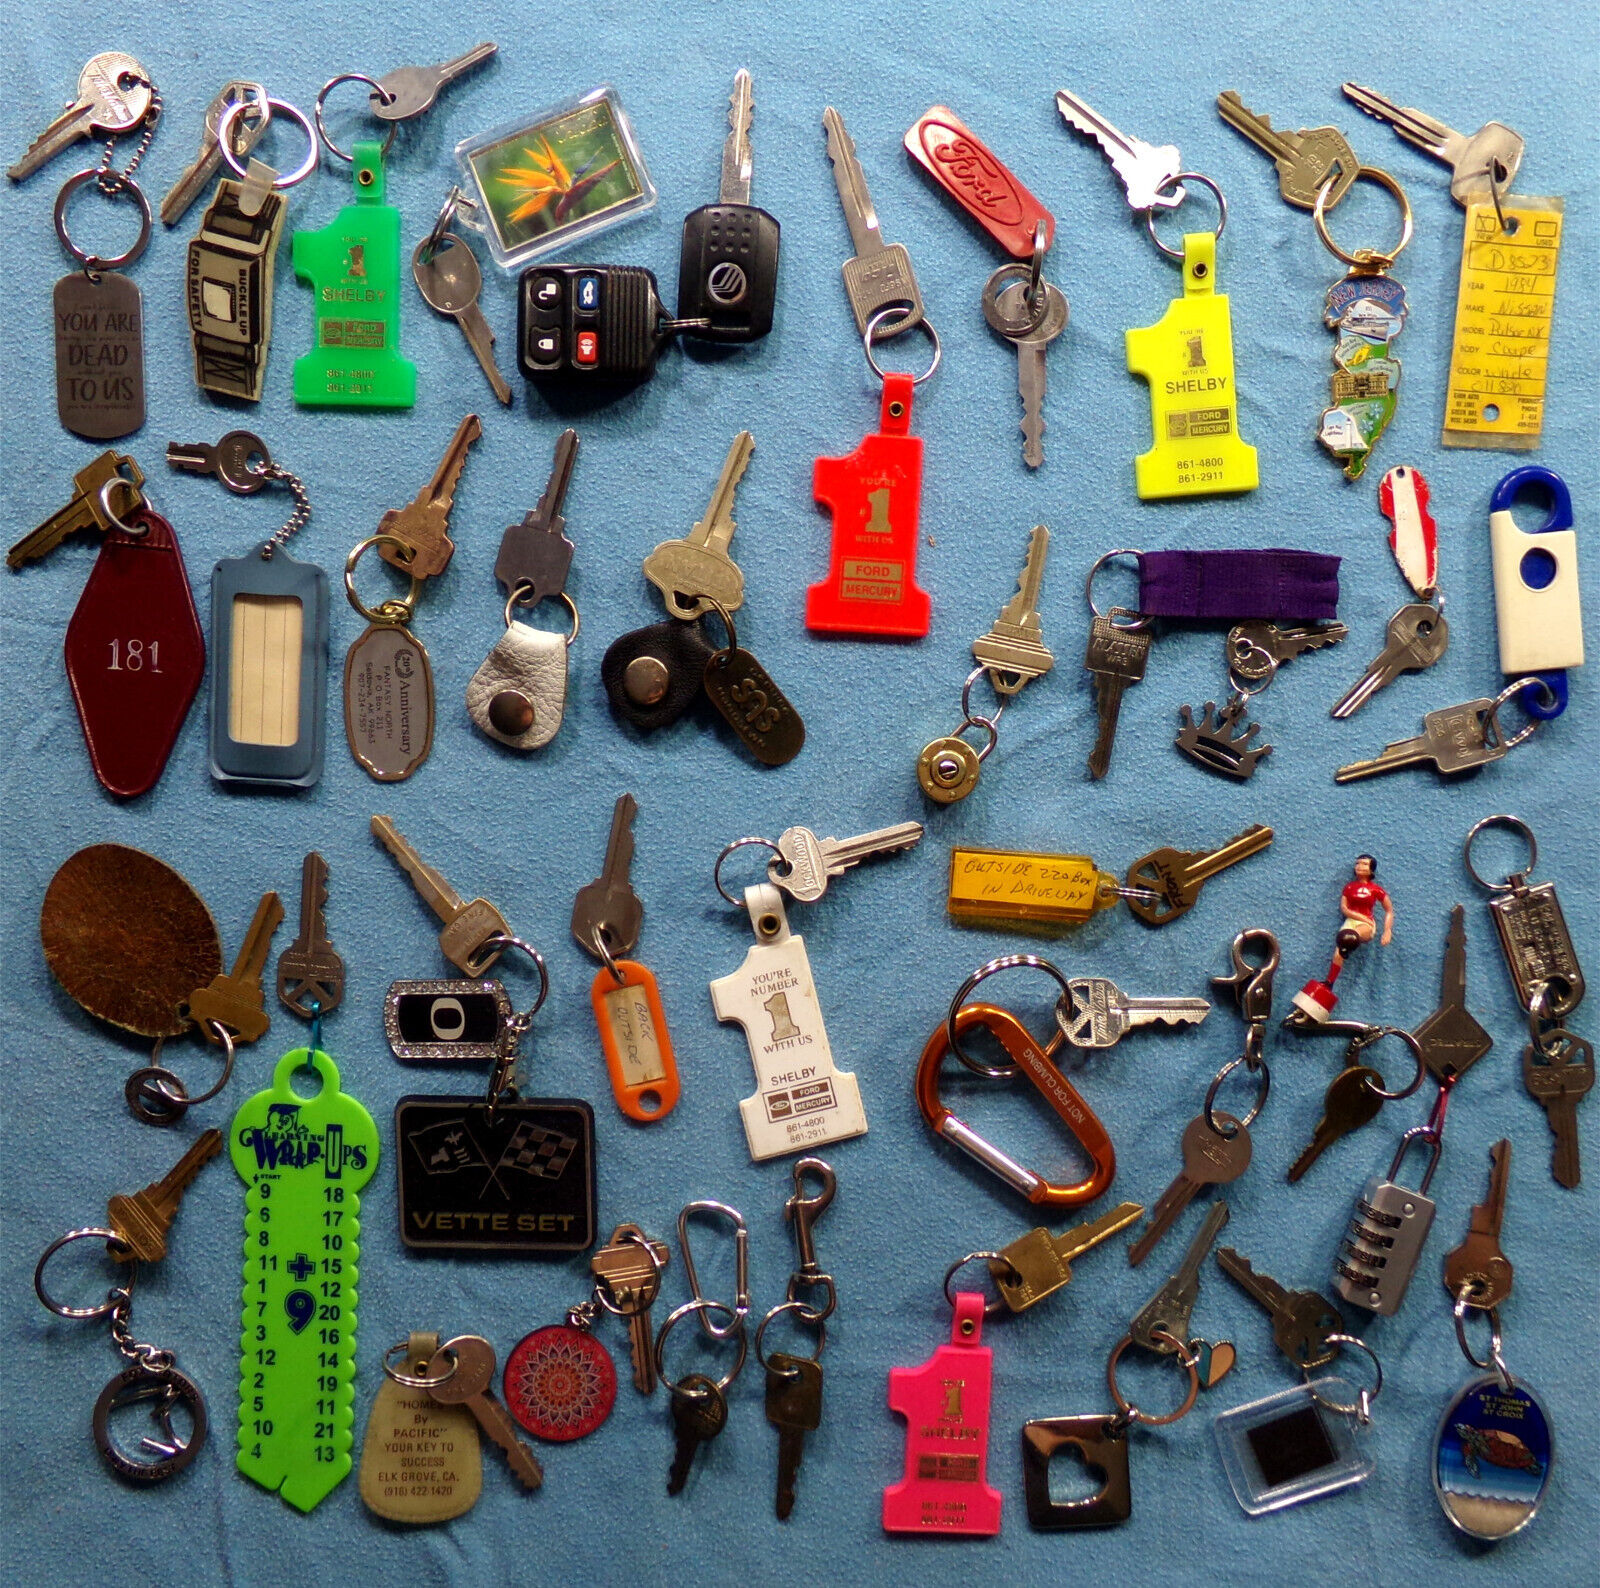 40 KEYS ON CHAINS: 1.75 LB Unique Vintage Key + Keychain Mixed Lot Collector Set